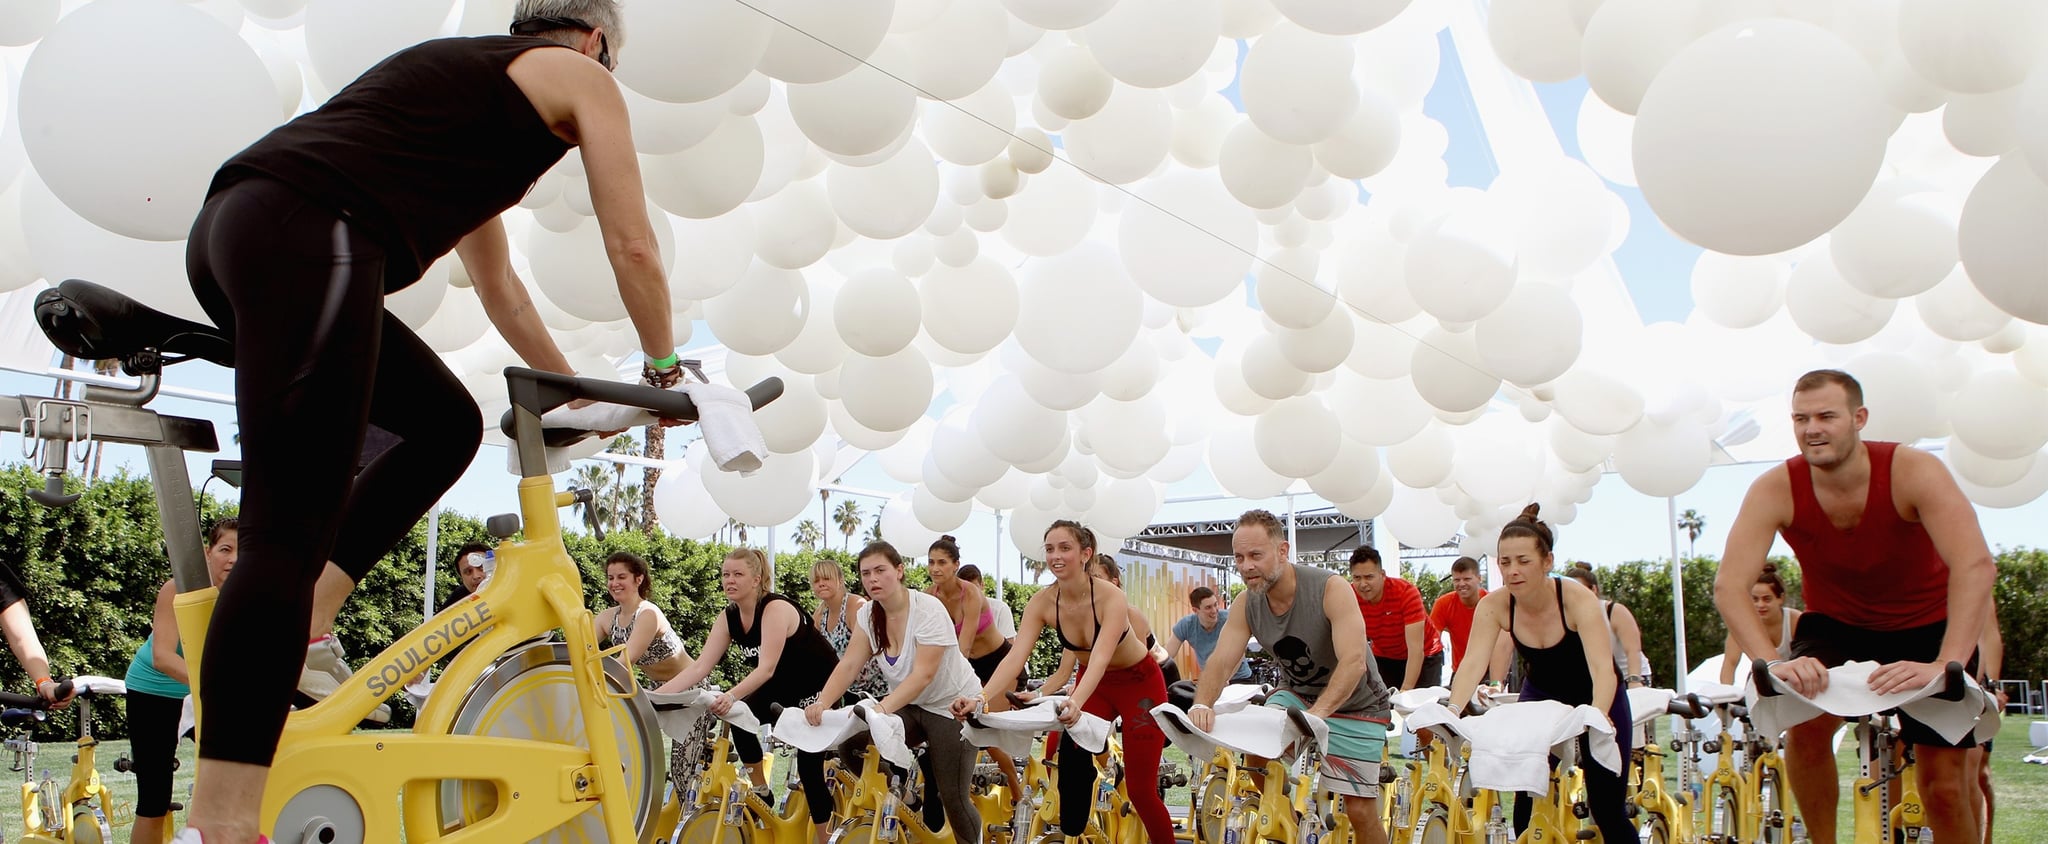 SoulCycle Prices 2020 | POPSUGAR Fitness